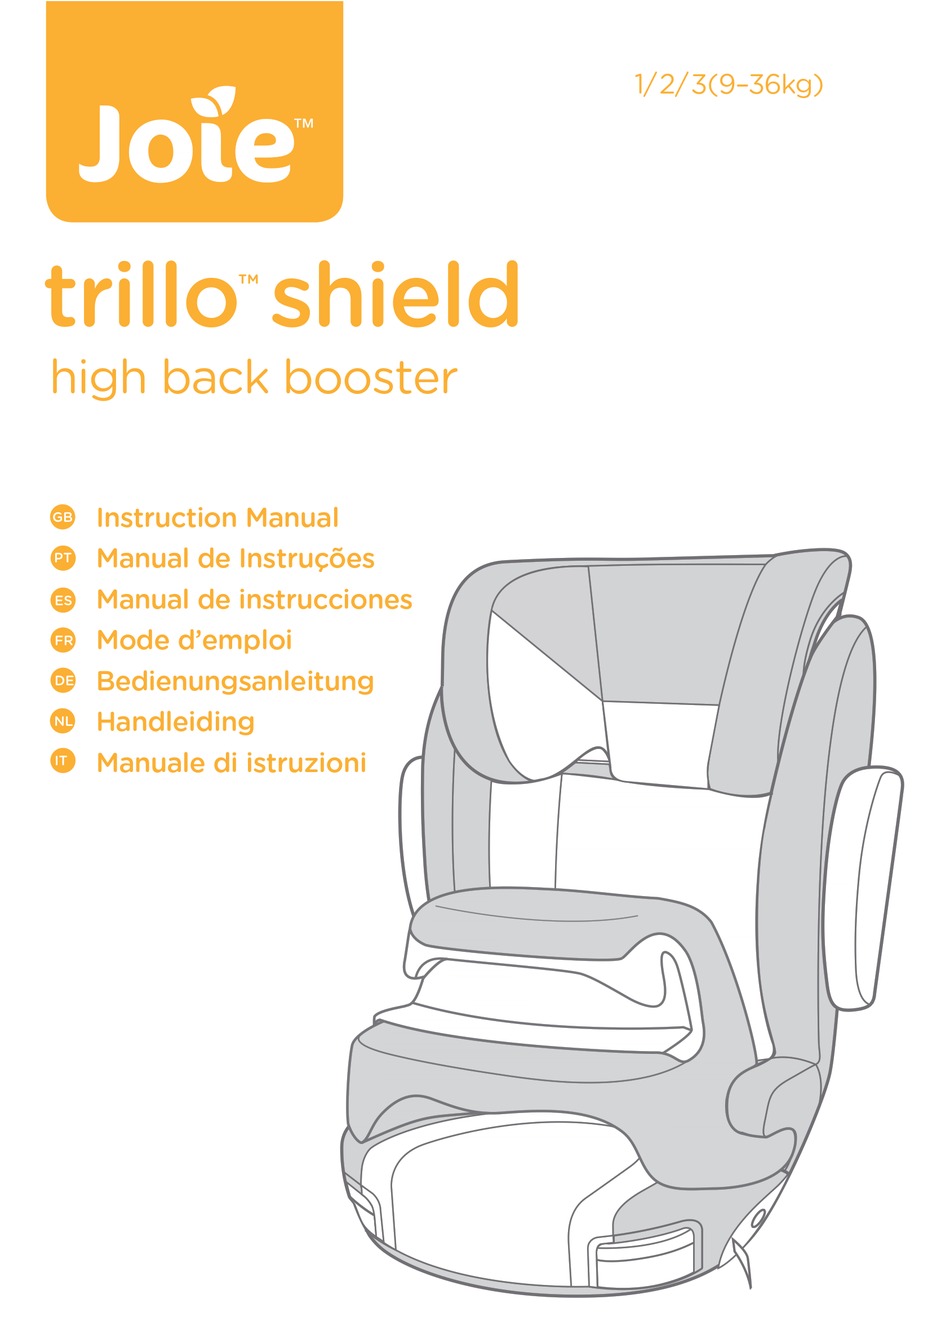 Joie Trillo Shield manual (English - 70 pages)